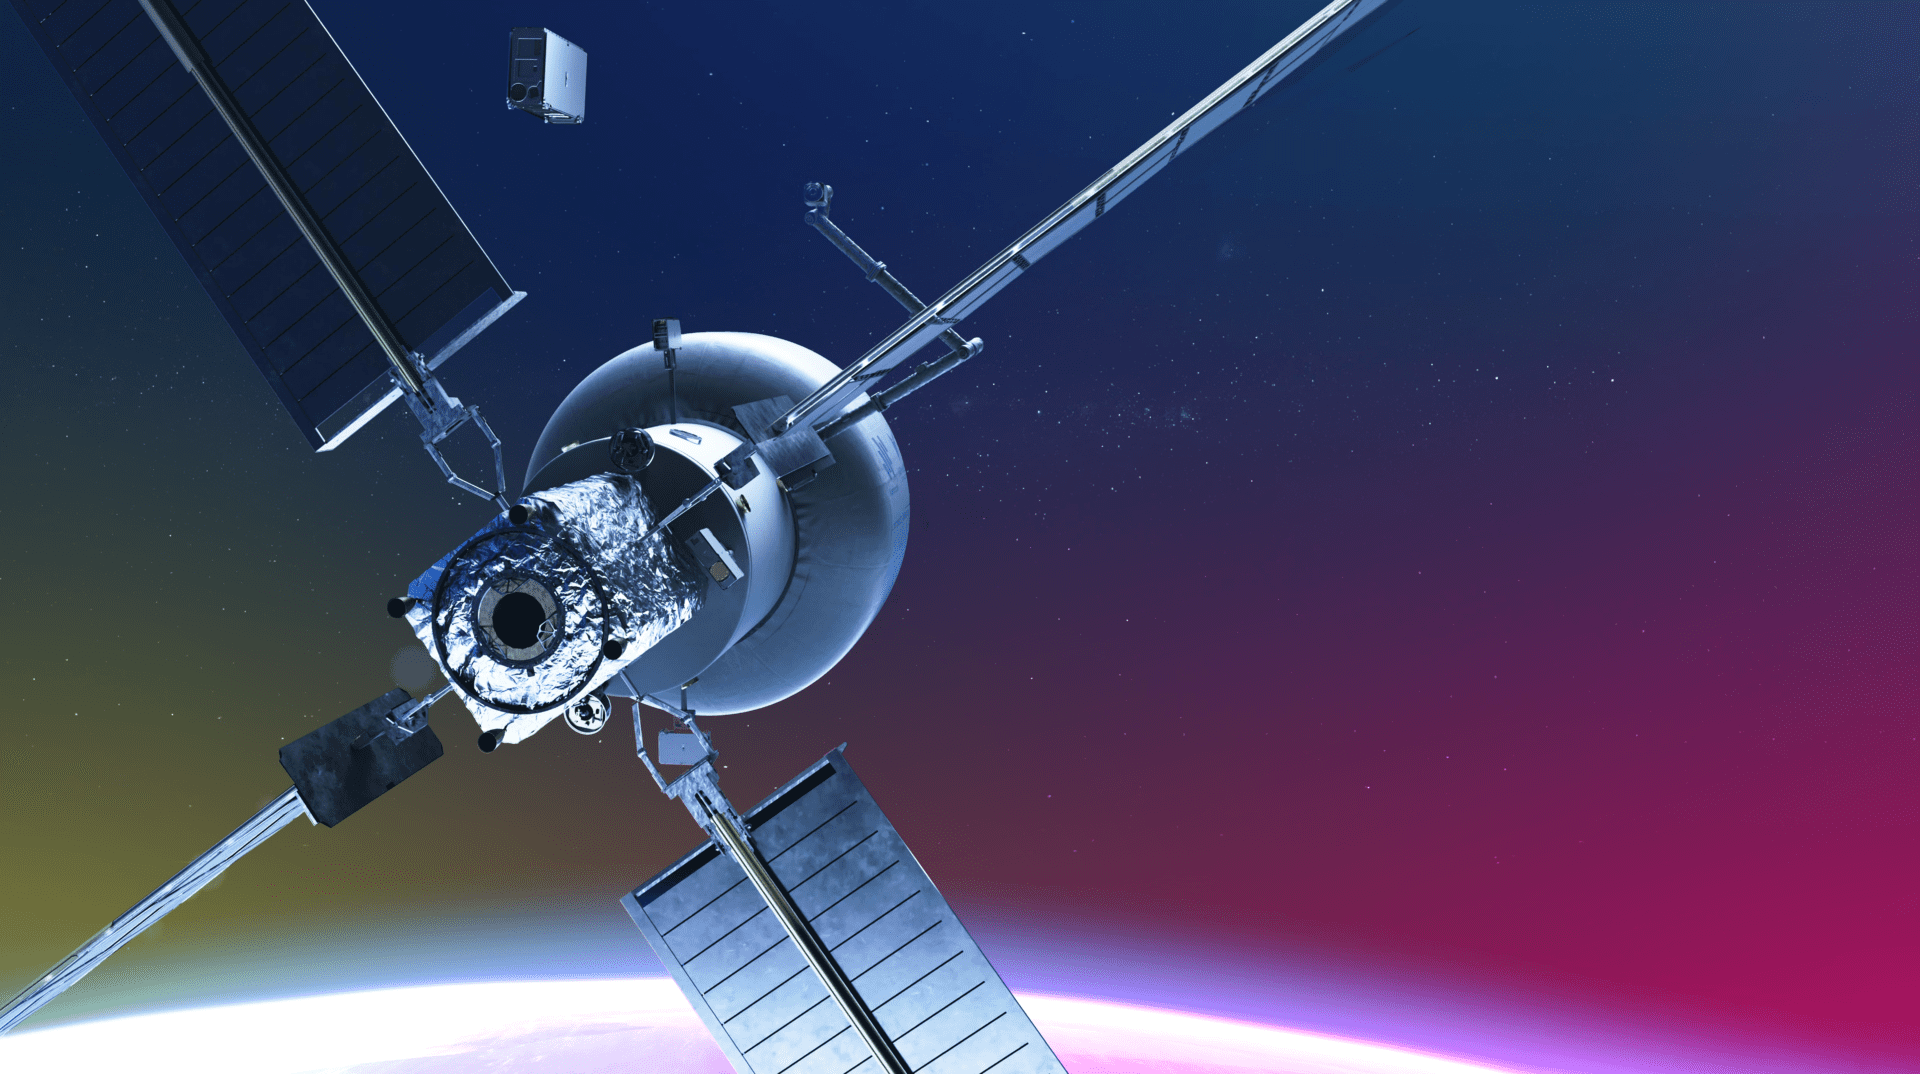 Starlab by Voyager Space, a free-flying commercial space station in a blue and pink sky